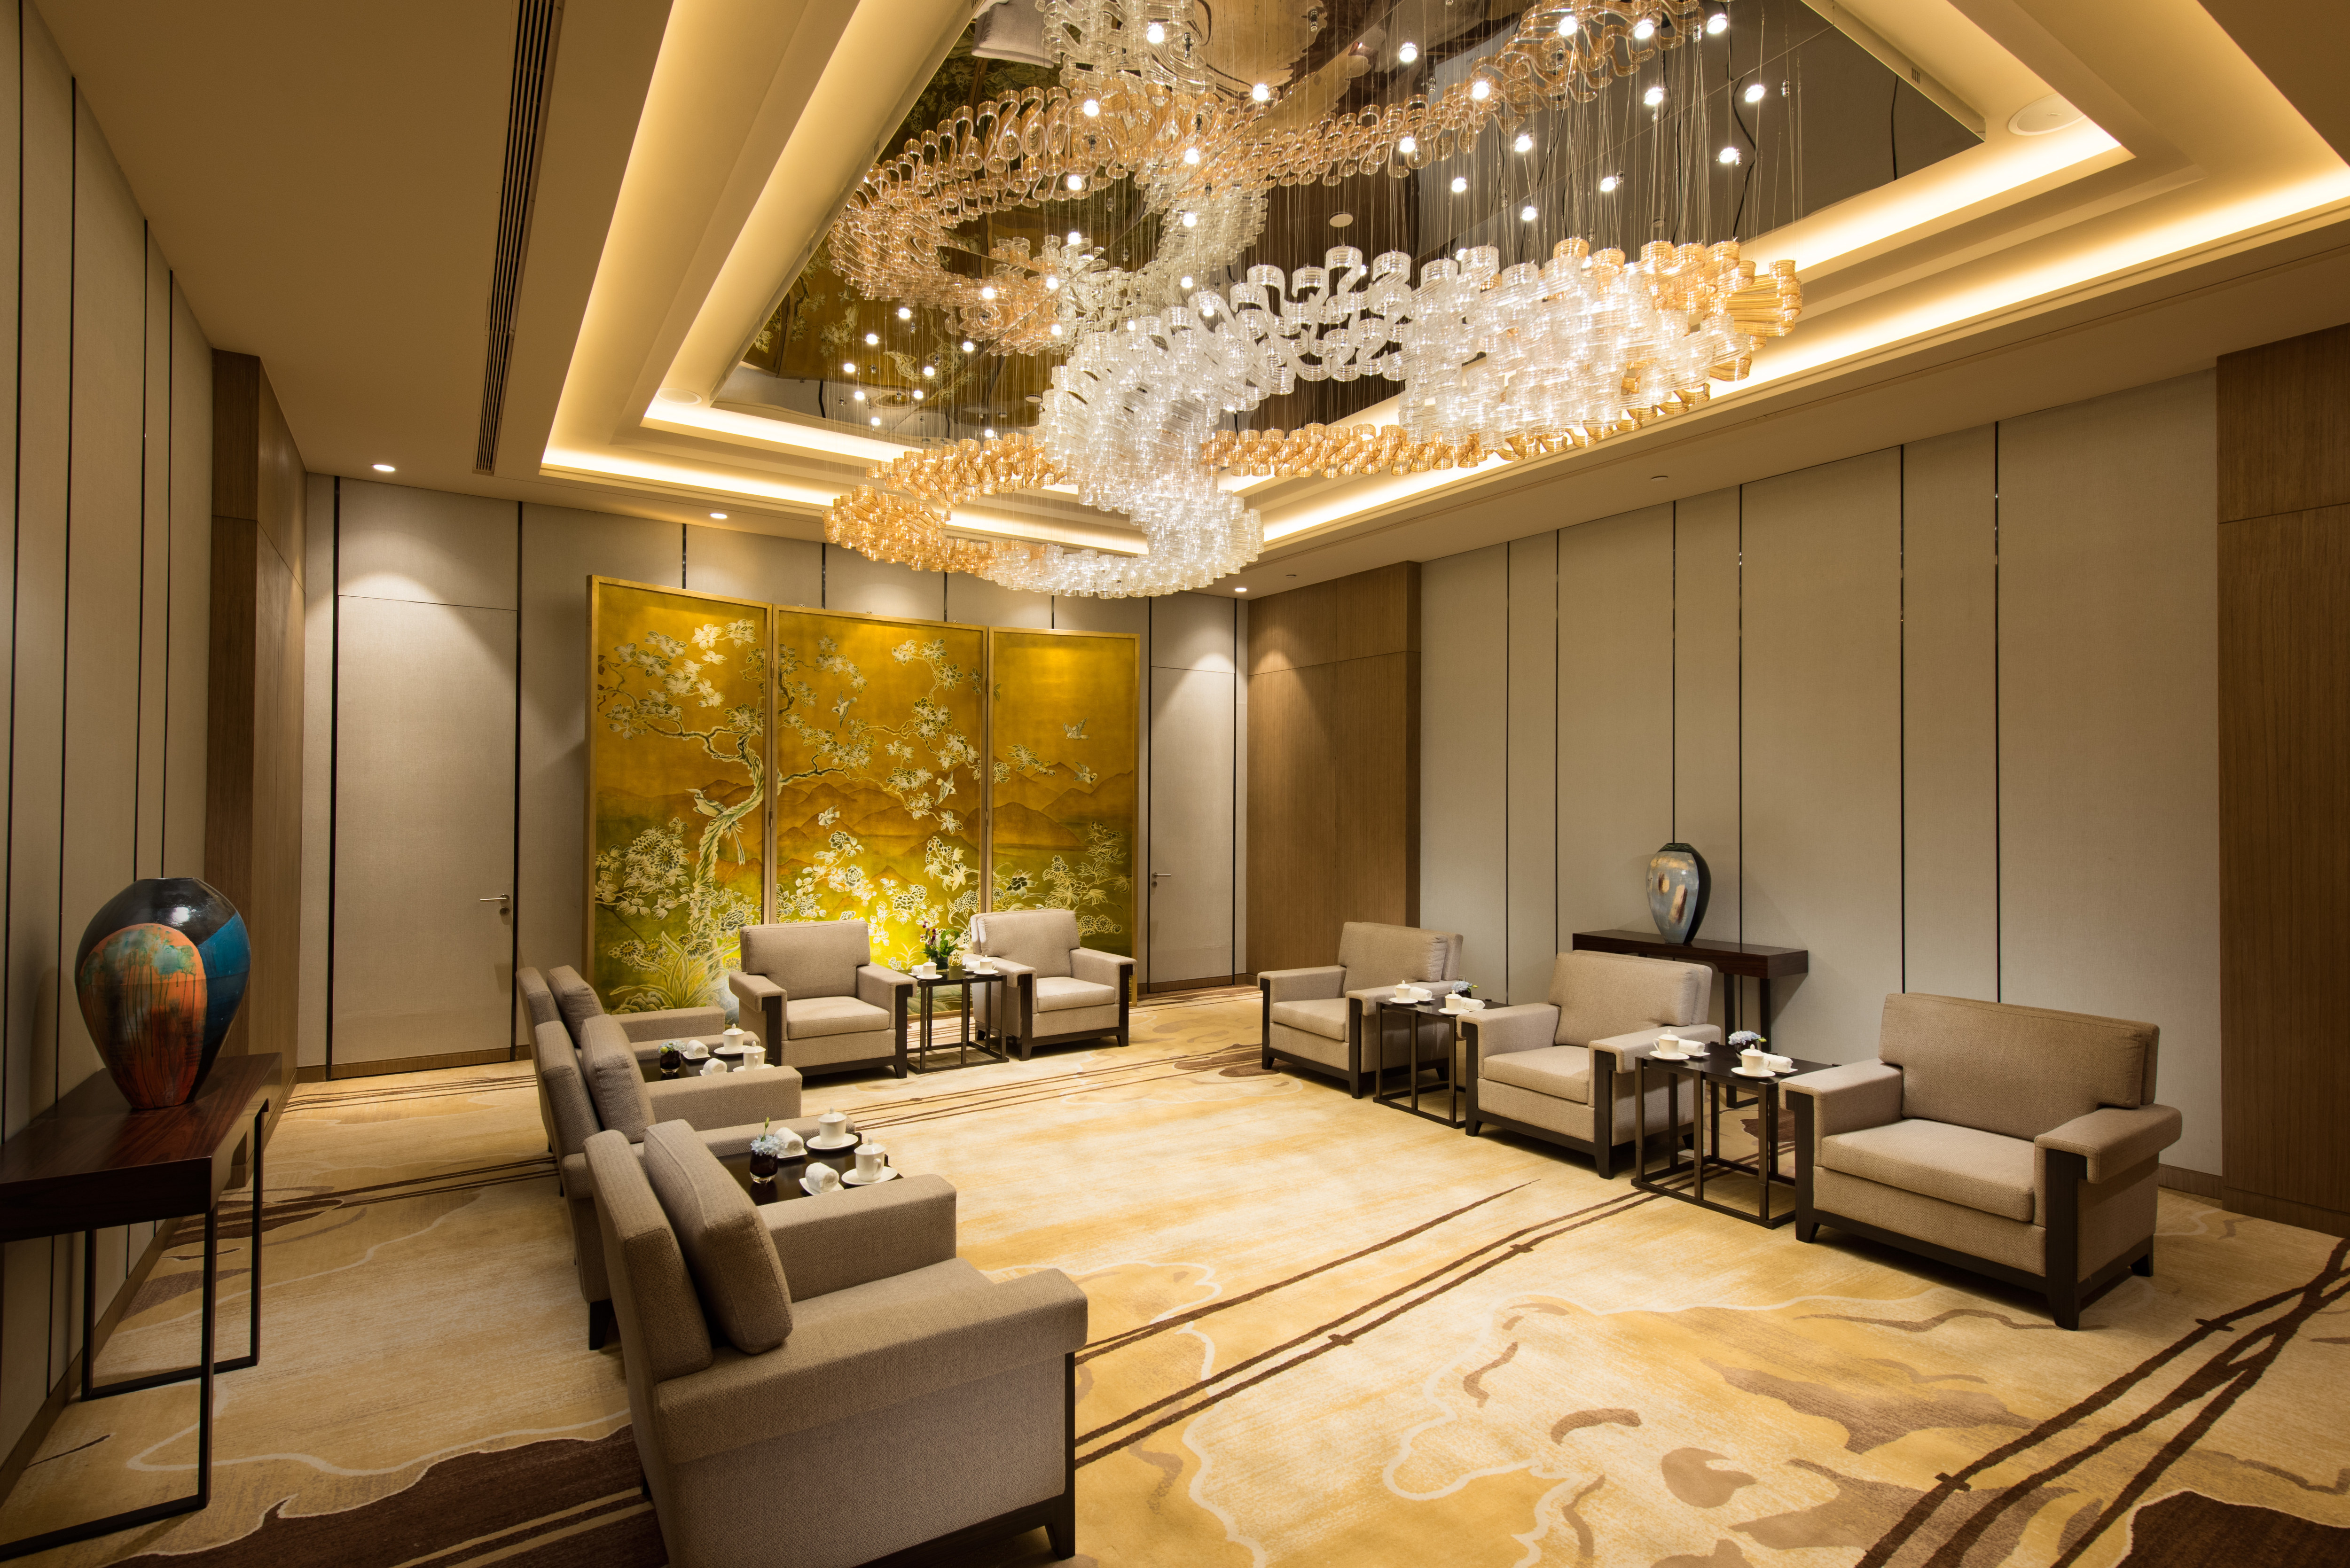 Lounge Area of VIP Room With Soft Seating, Decorative Lighting, and Large Wall Art Feature